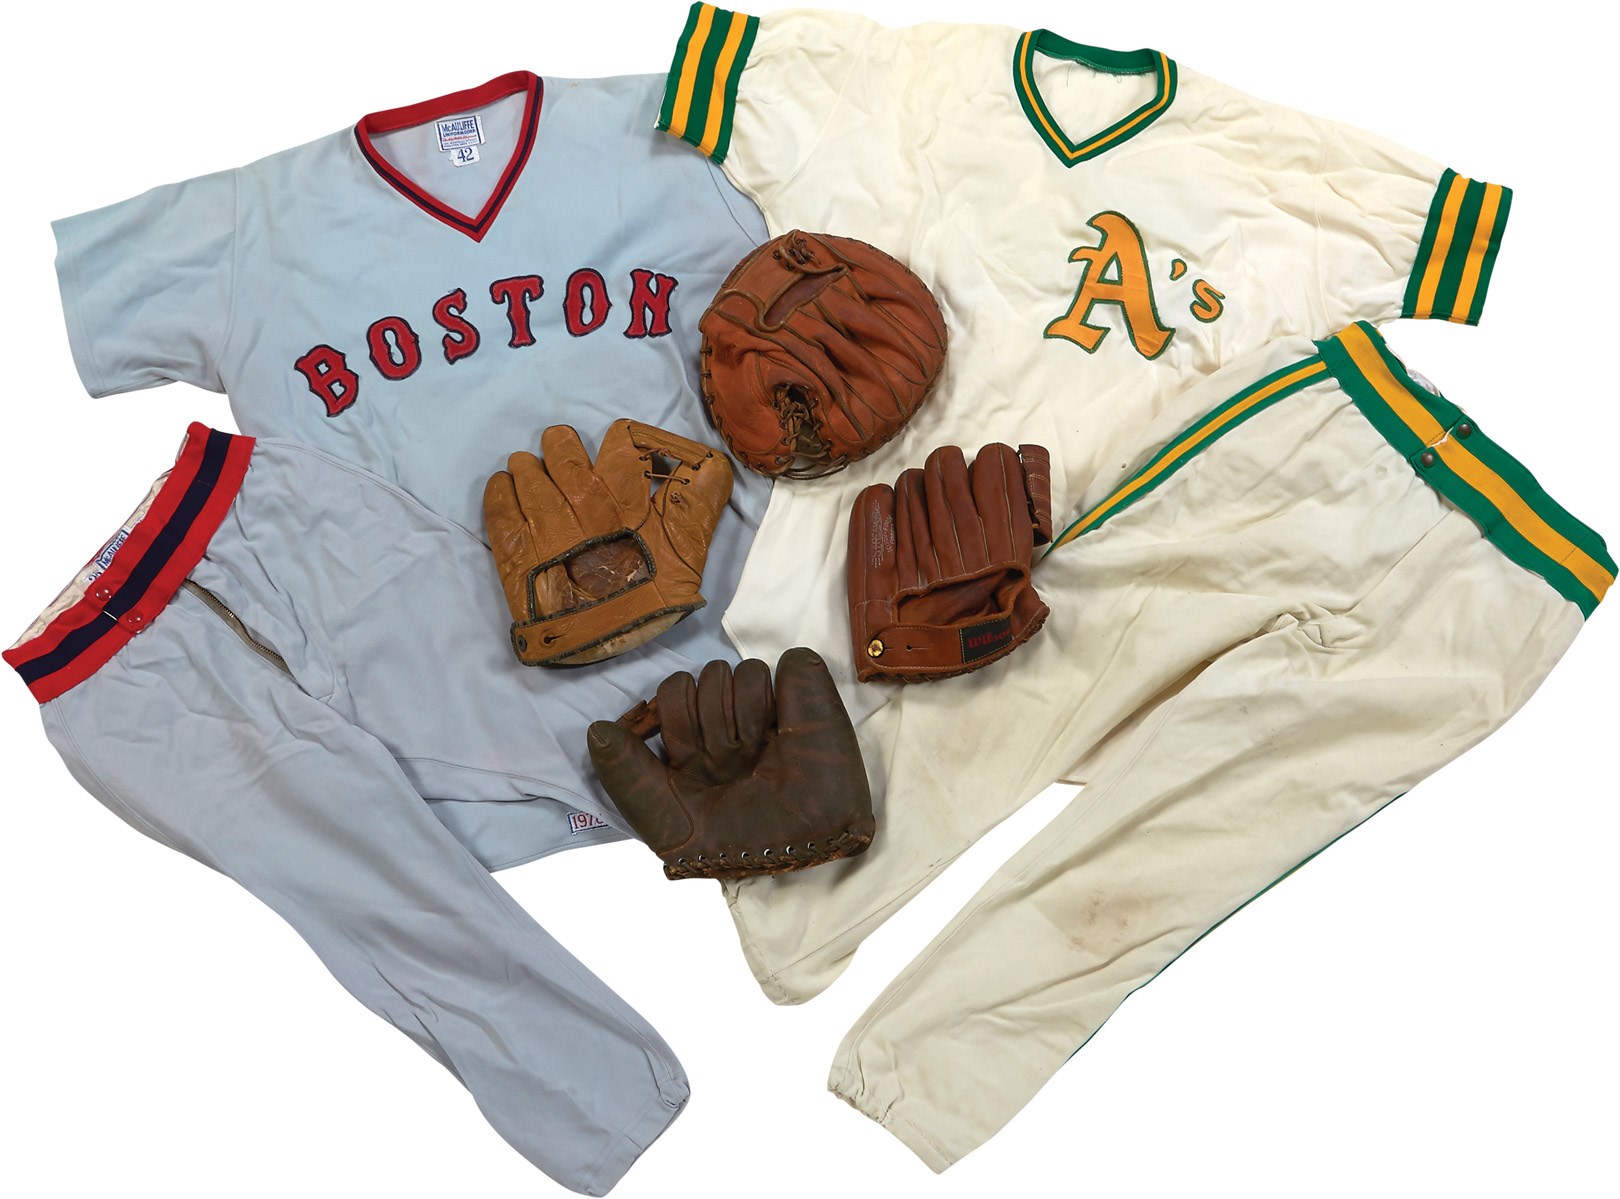 1970s Game Worn Uniforms and Gloves (6)